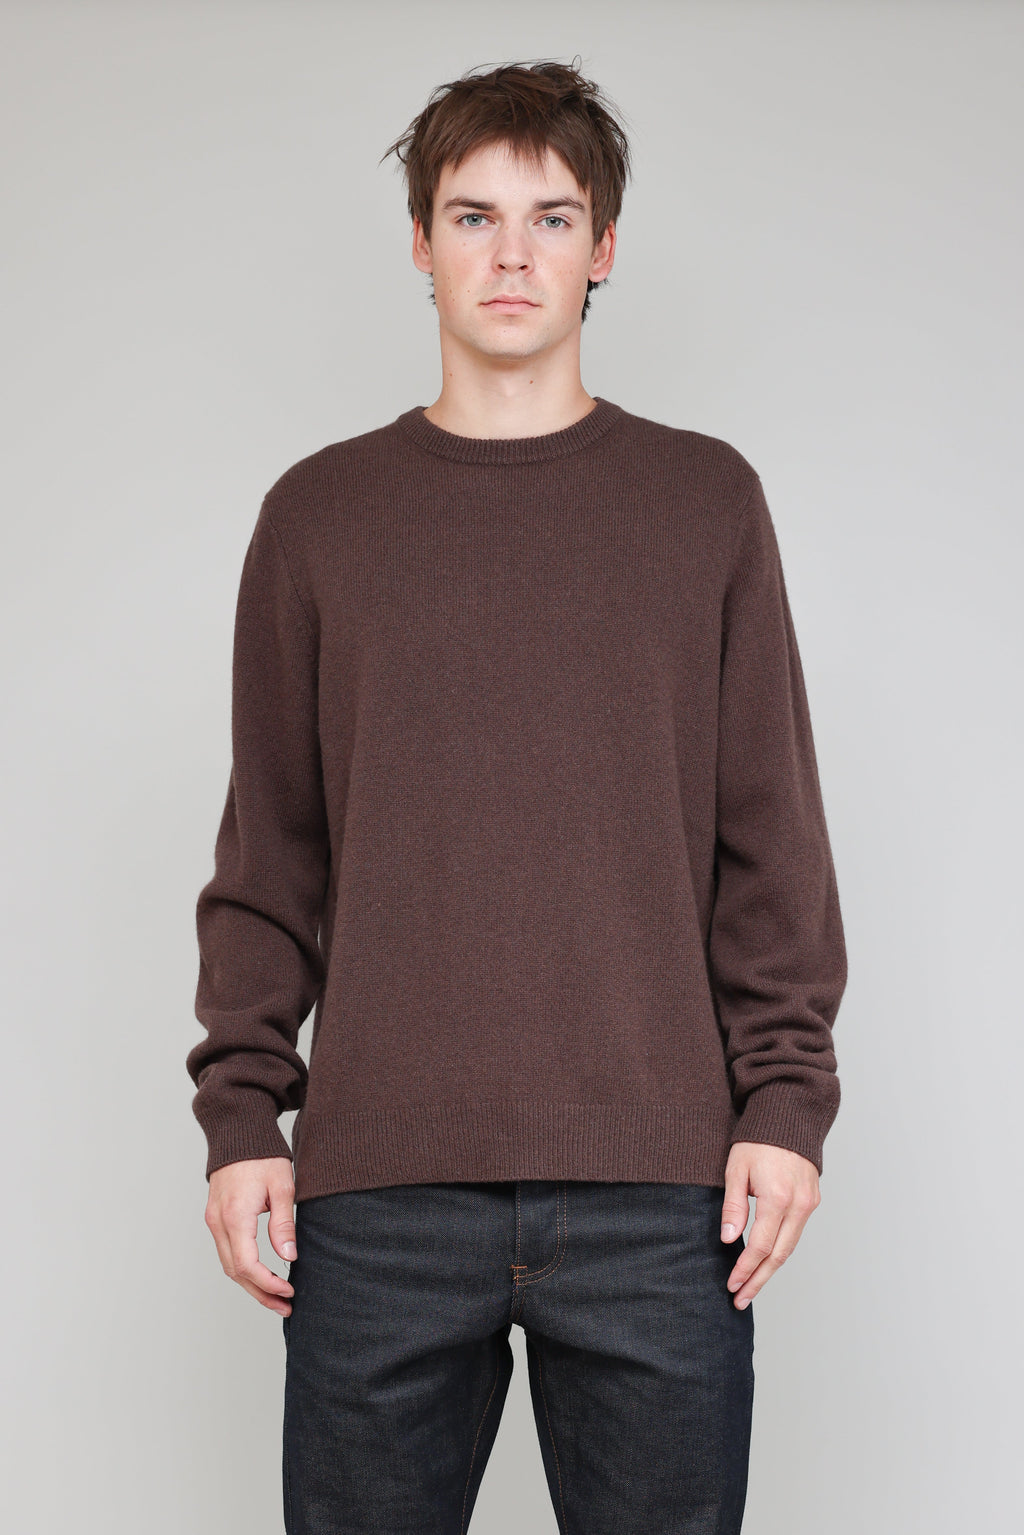 New Wool Crew in Brown 01